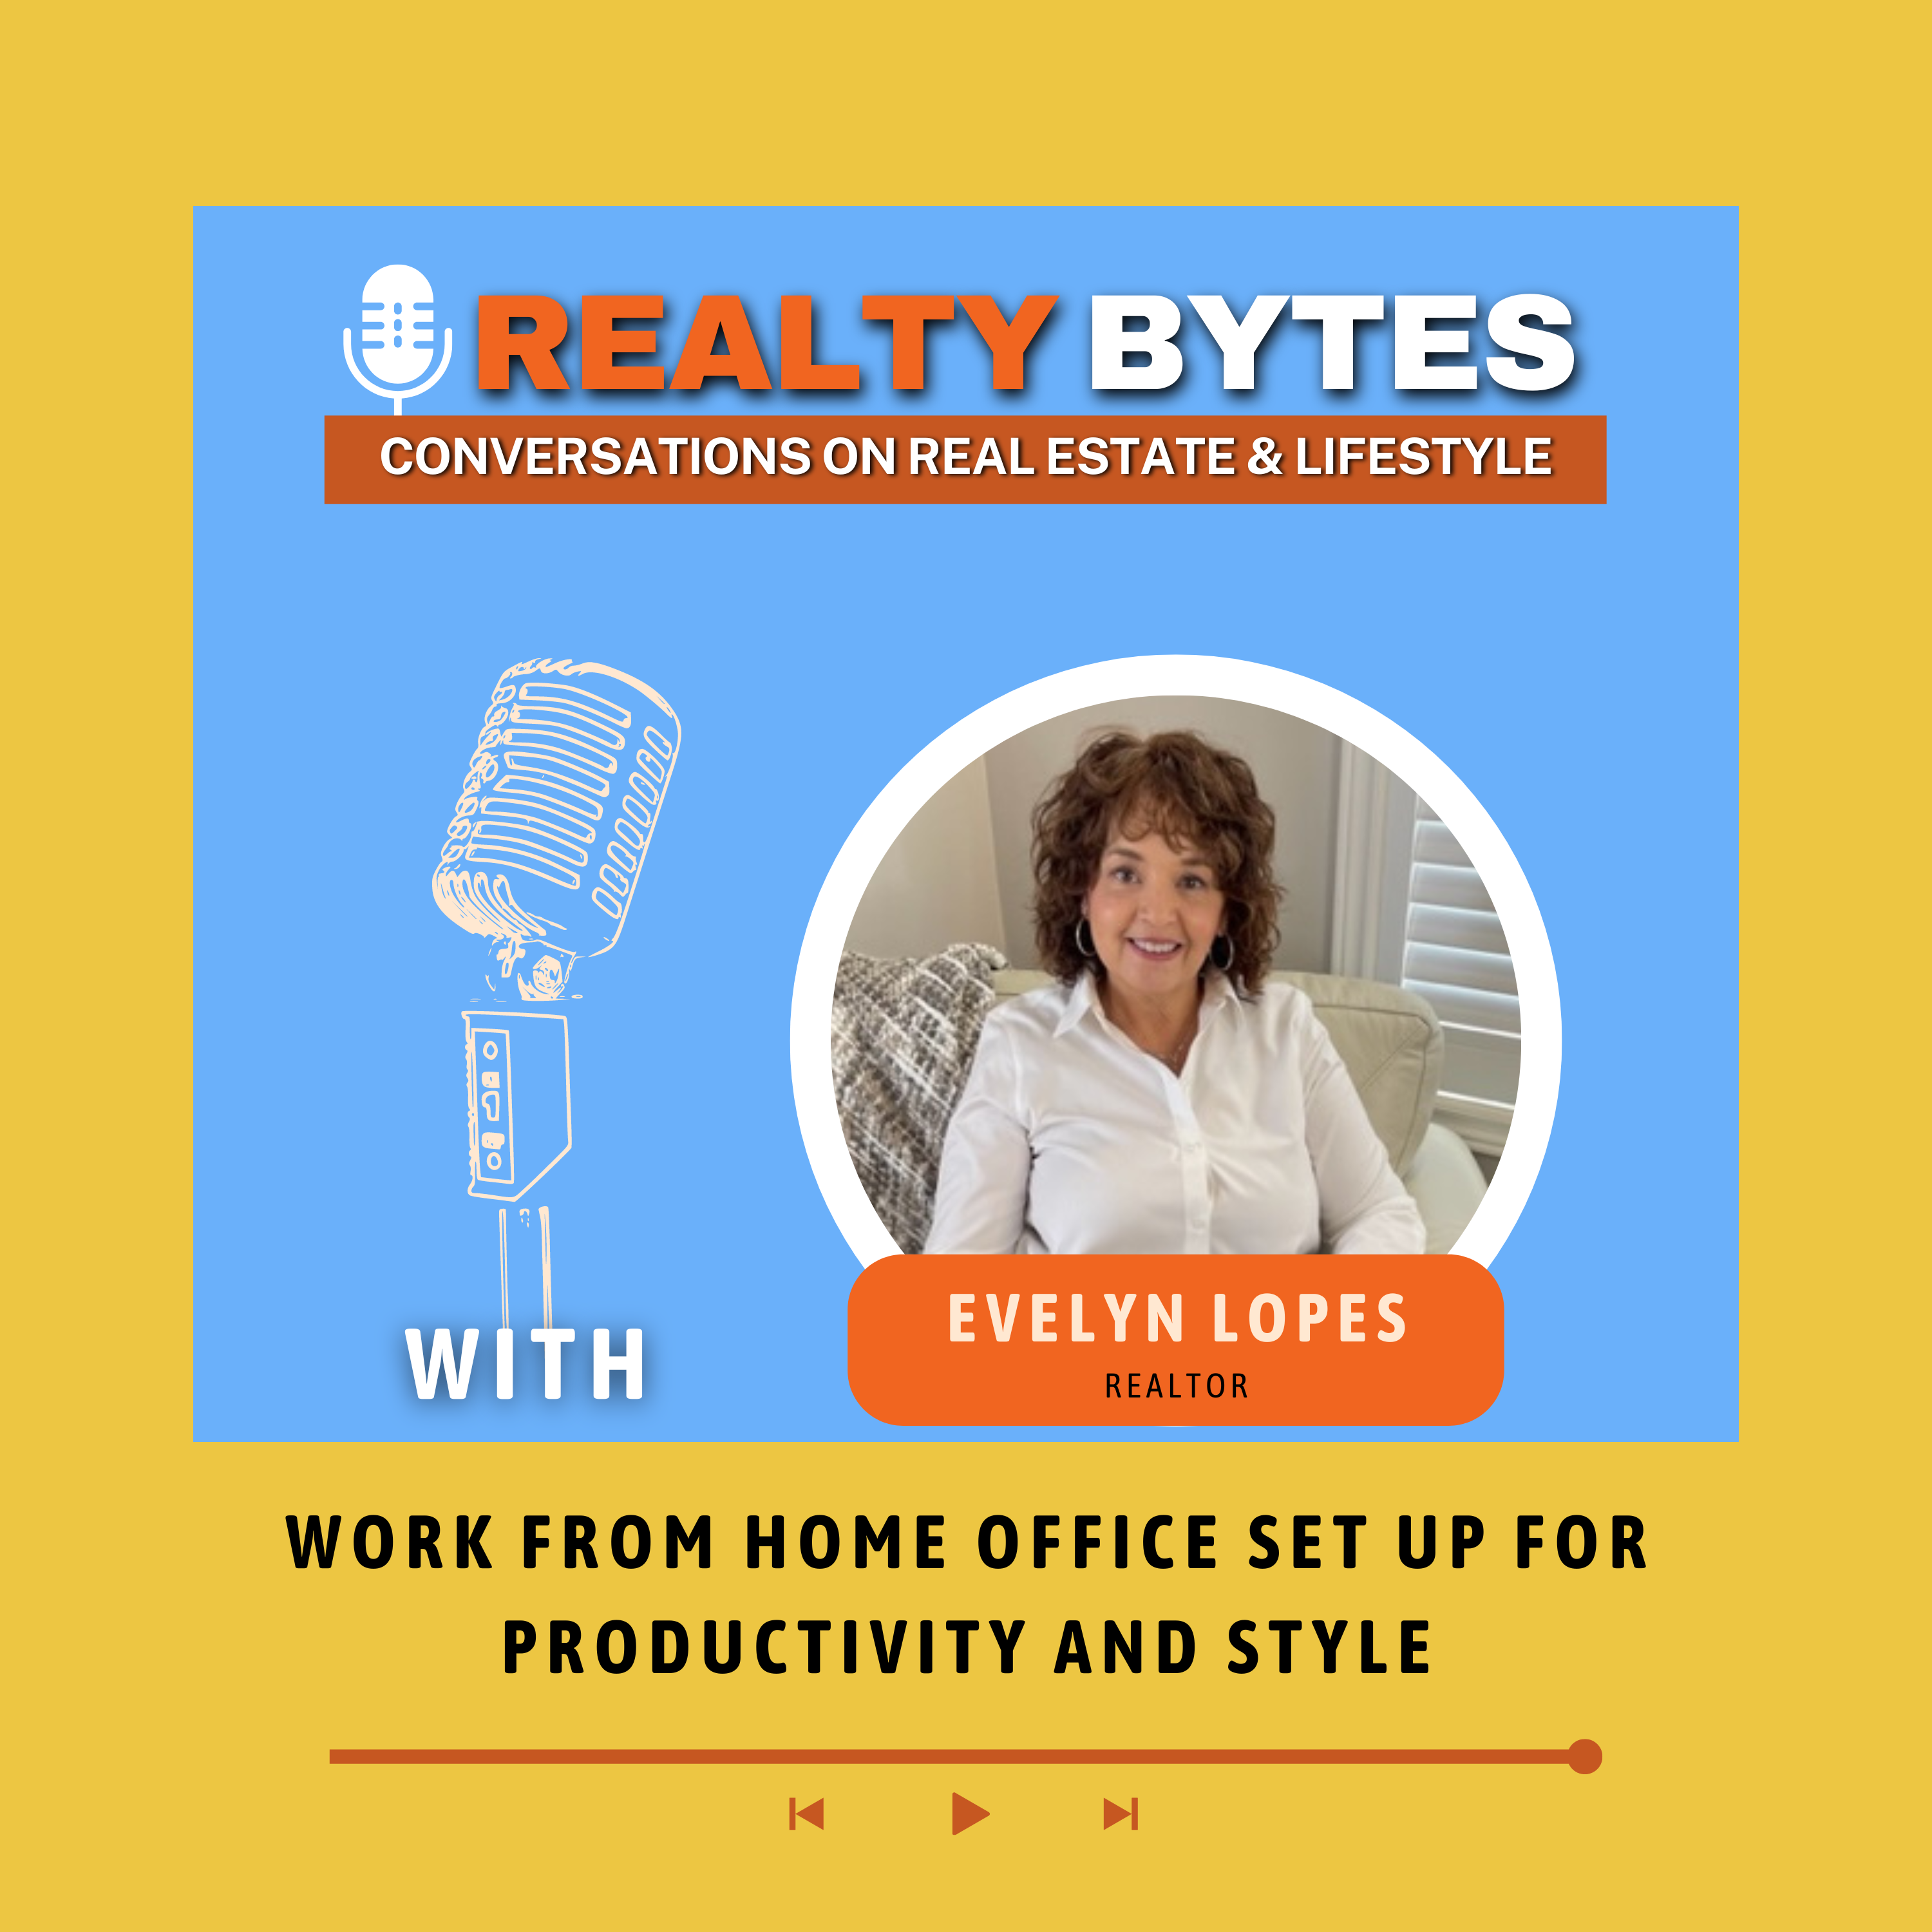 Ep 1 - WORK FROM HOME OFFICE SET UP  For Productivity and Style (1).png